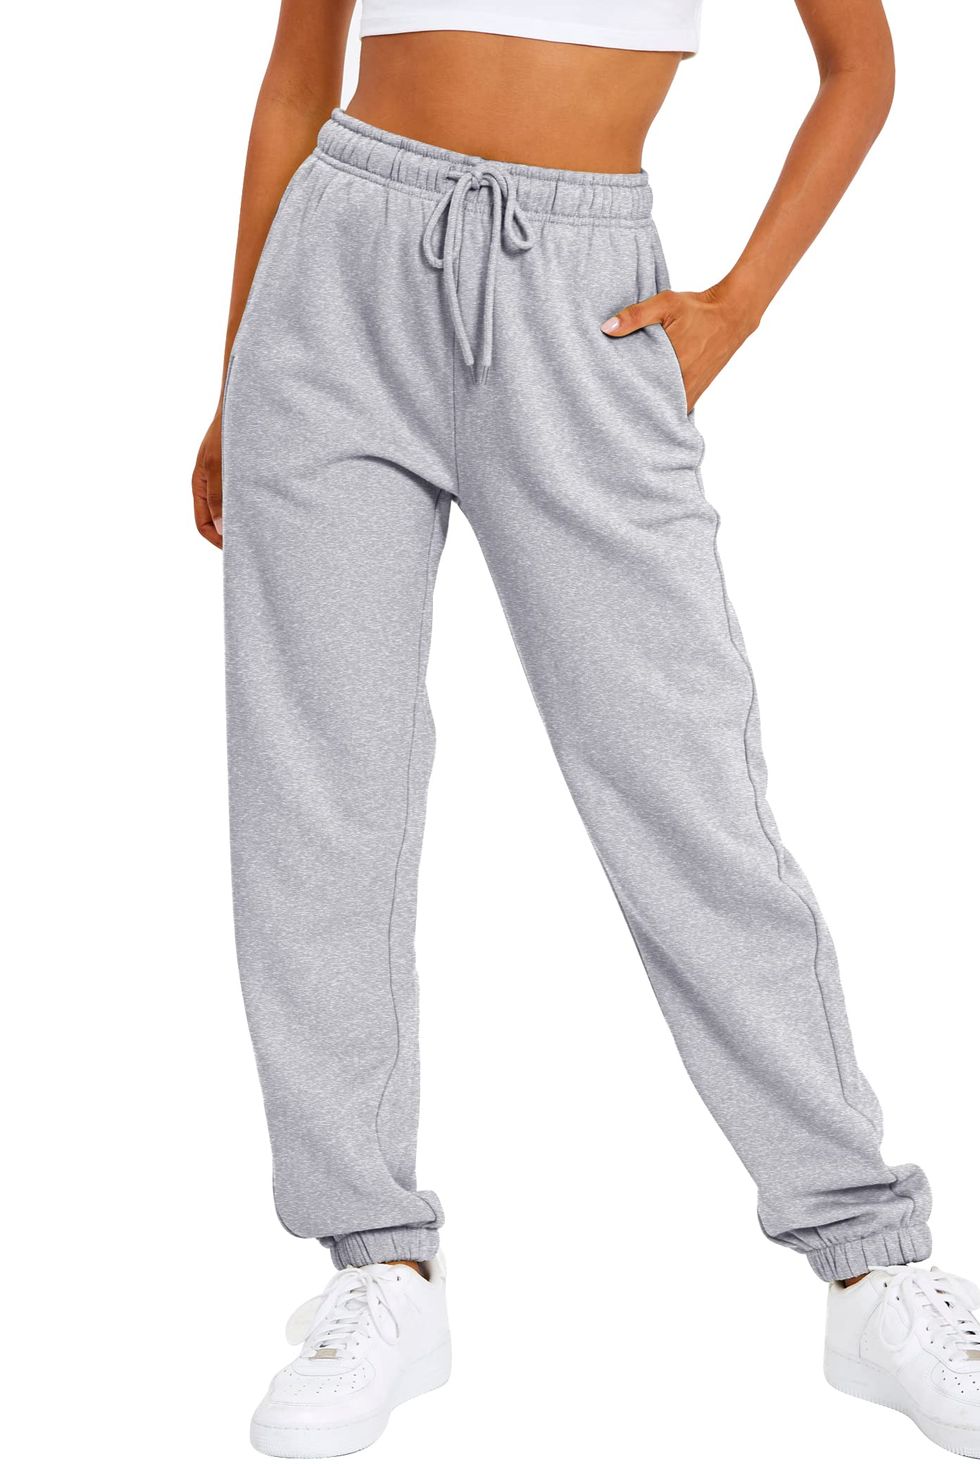 Stylish and Comfortable Women's Joggers